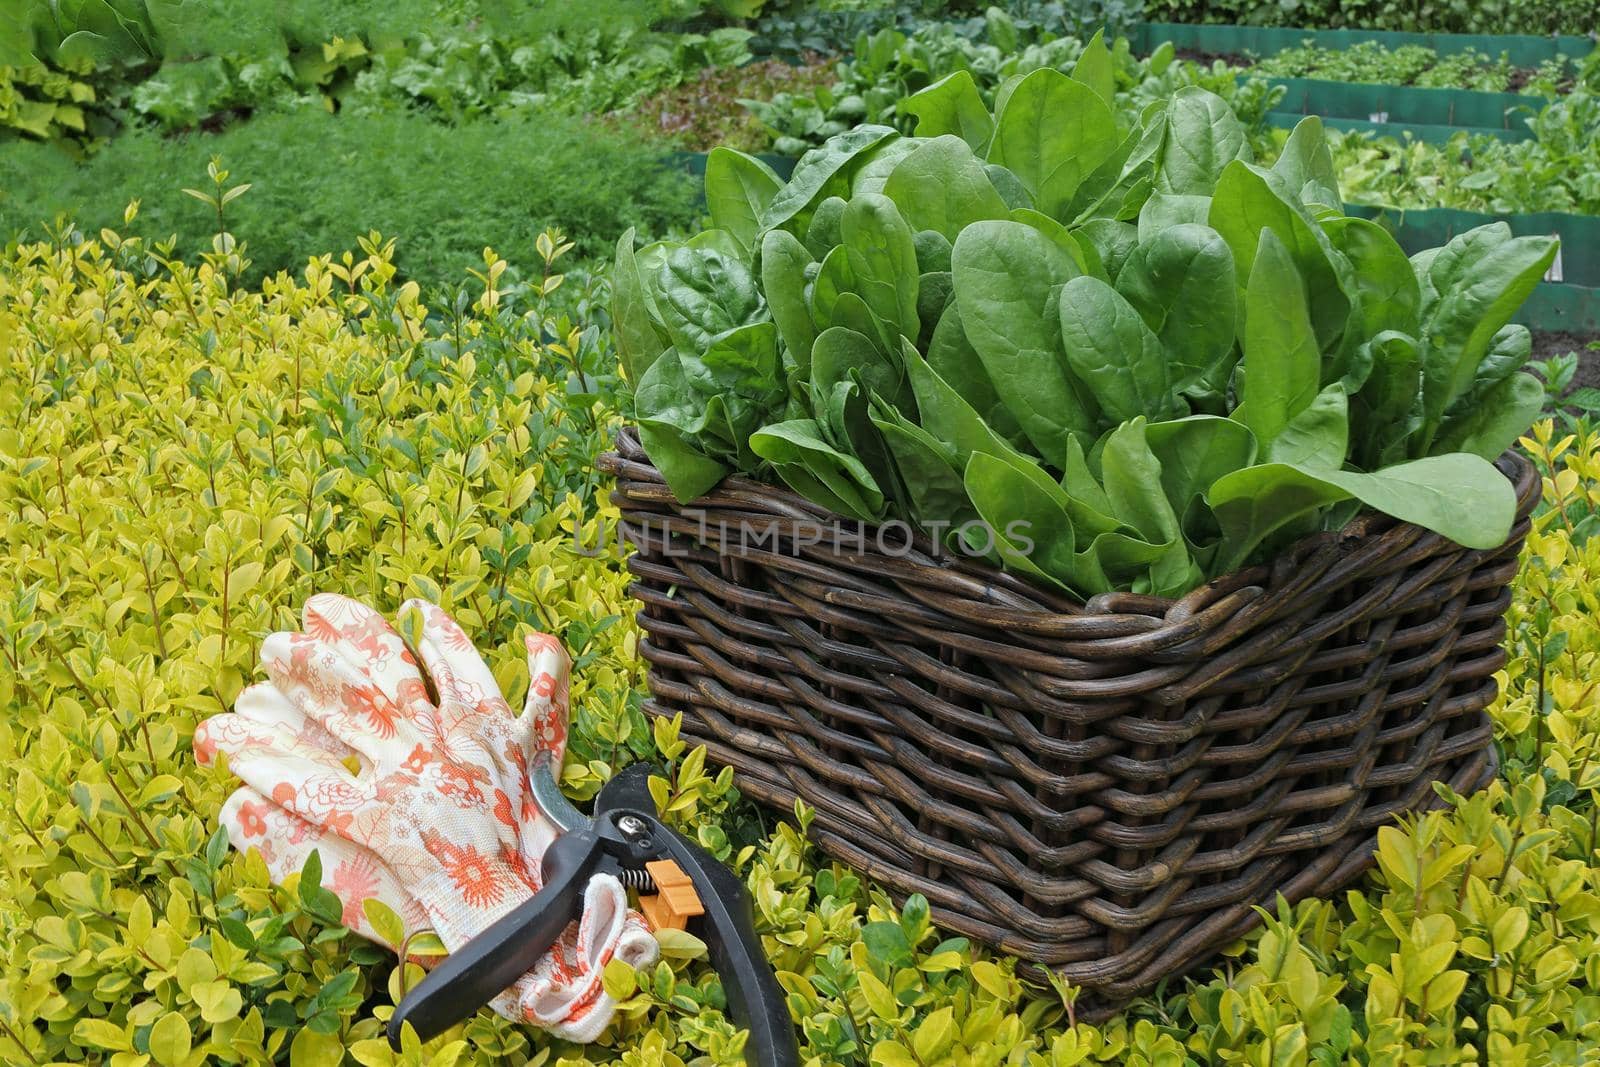 Green juicy fresh raw spinach in a wicker basket in the vegetable garden on a background of greenery. secateurs and gardening gloves lie next to the basket. Gardening concept. Organic superfood. Nutrition and treatment. Vitamins and minerals. Vegan food.